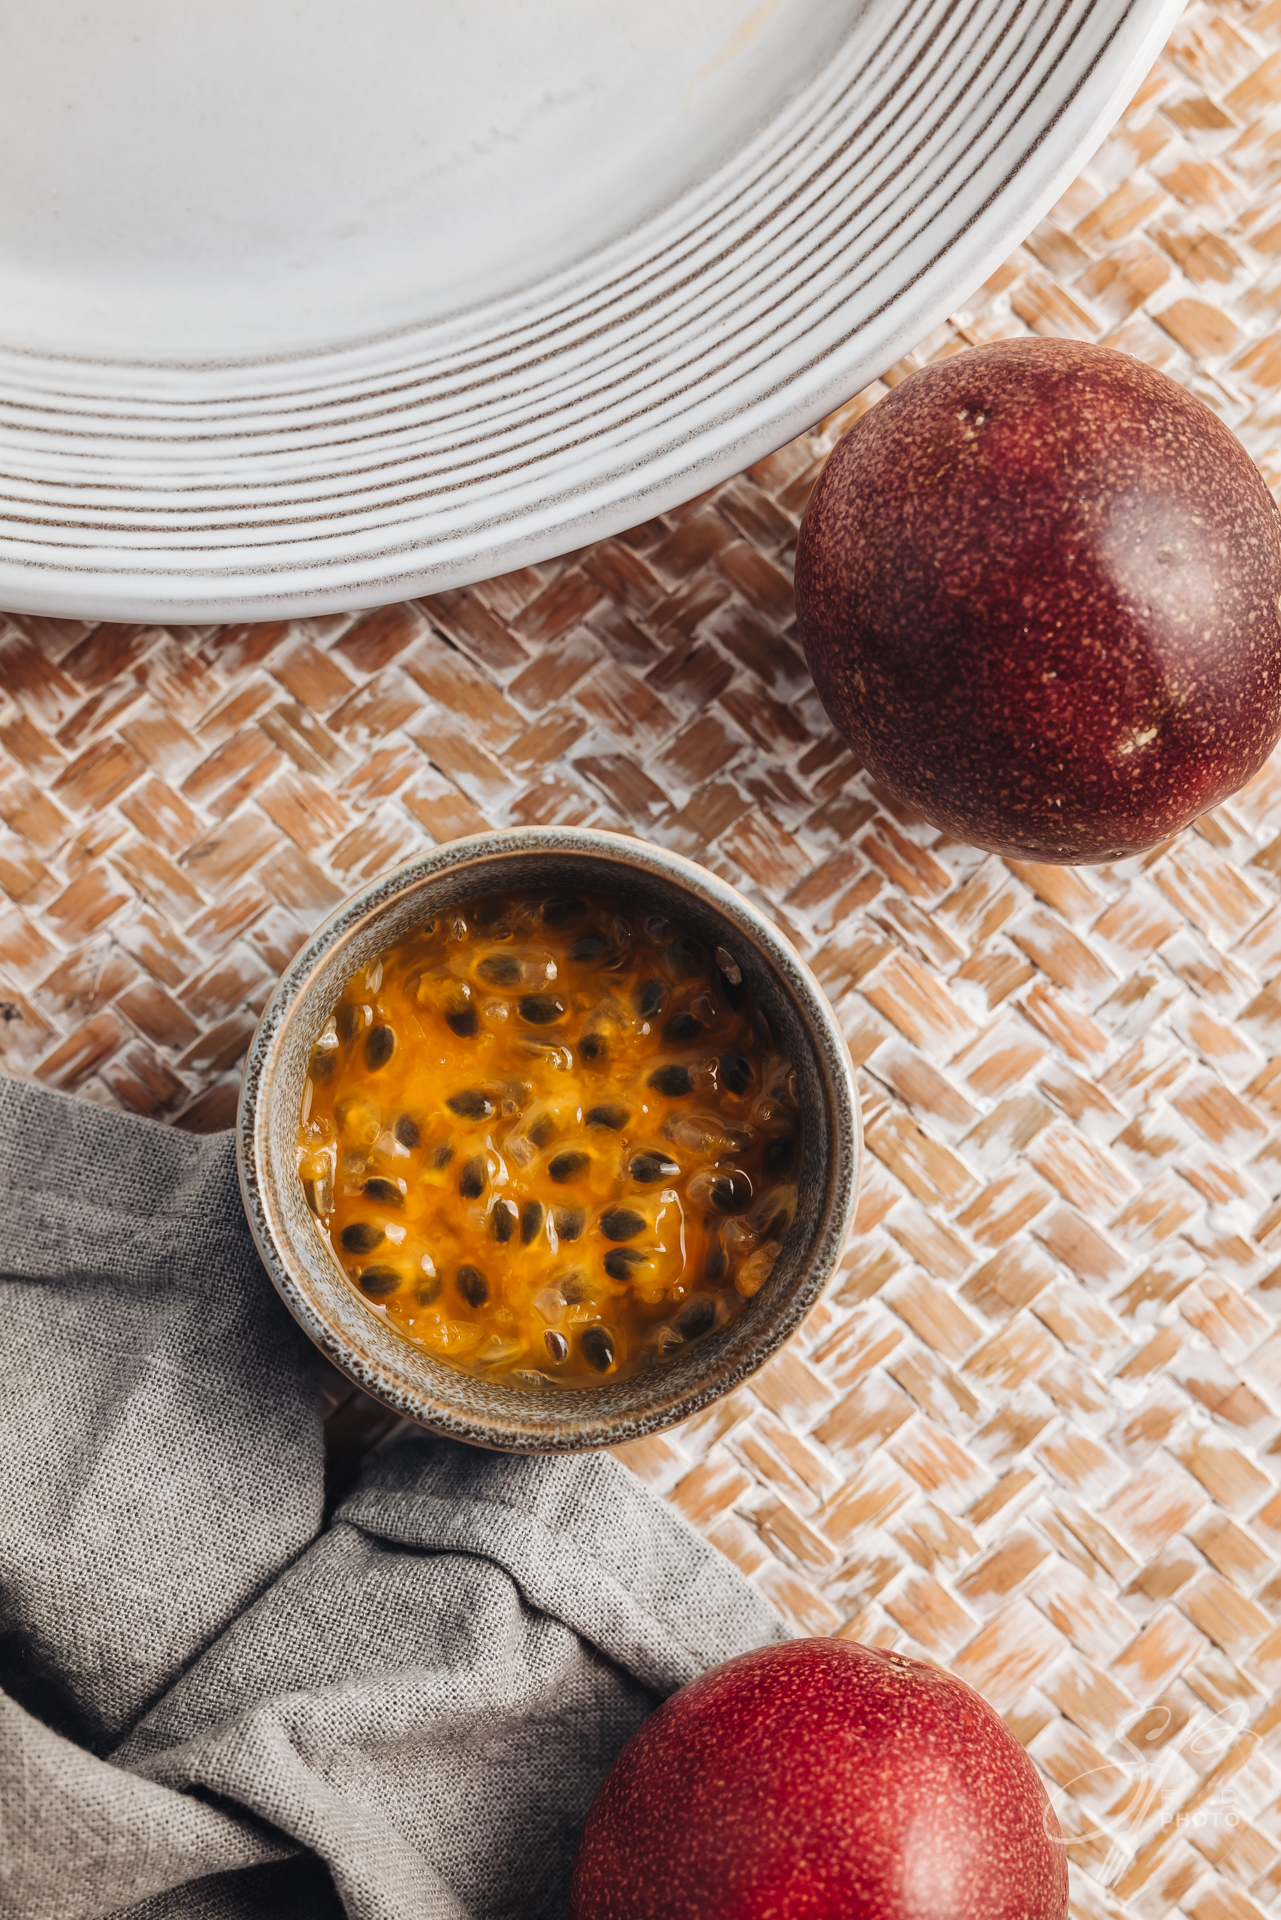 Fresh and juicy raw passion fruit